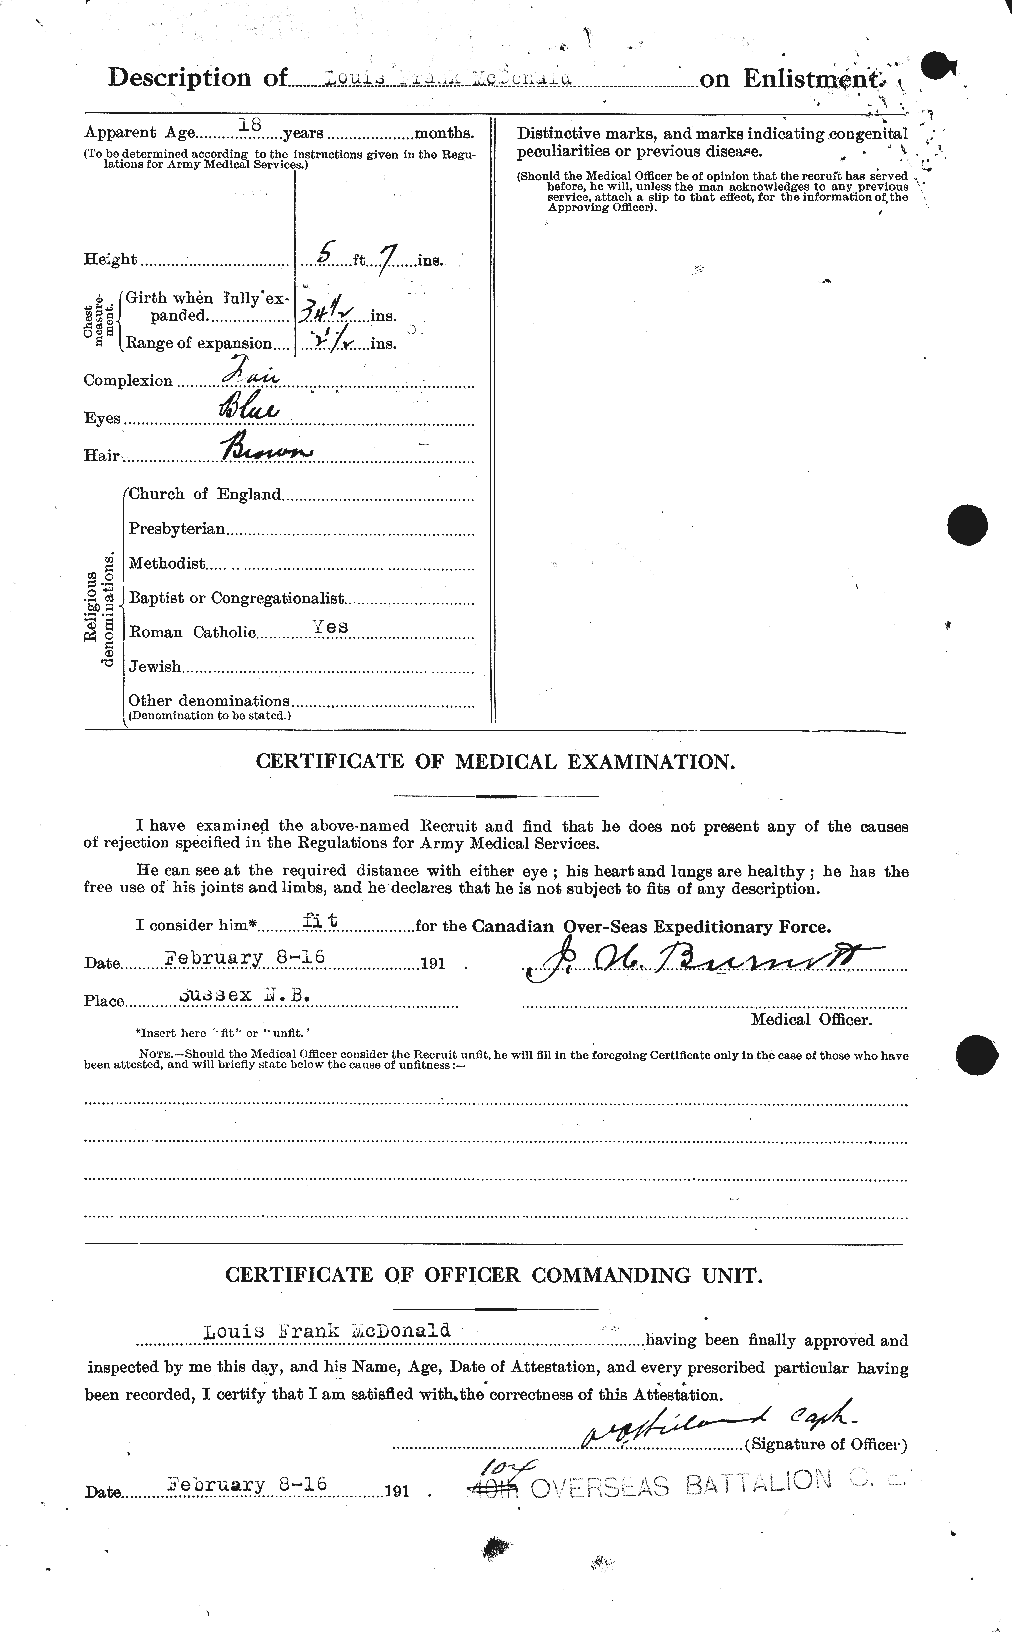 Personnel Records of the First World War - CEF 522583b